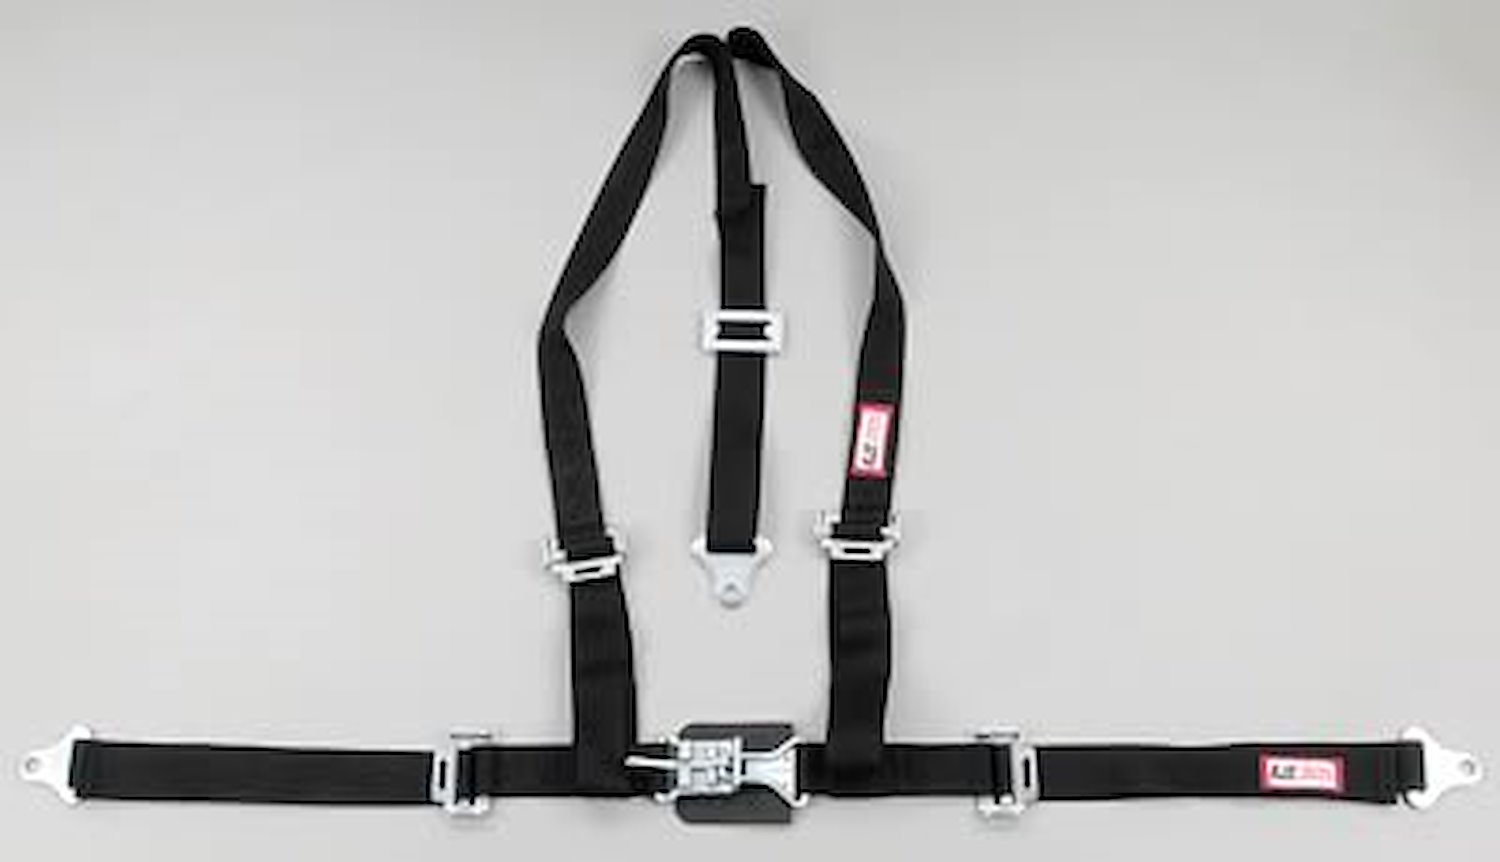 NON-SFI L&L HARNESS 2 PULL DOWN Lap Belt SNAP SEWN IN 2 S.H. Y FLOOR Mount w/STERNUM STRAP WRAP/SNAP GRAY